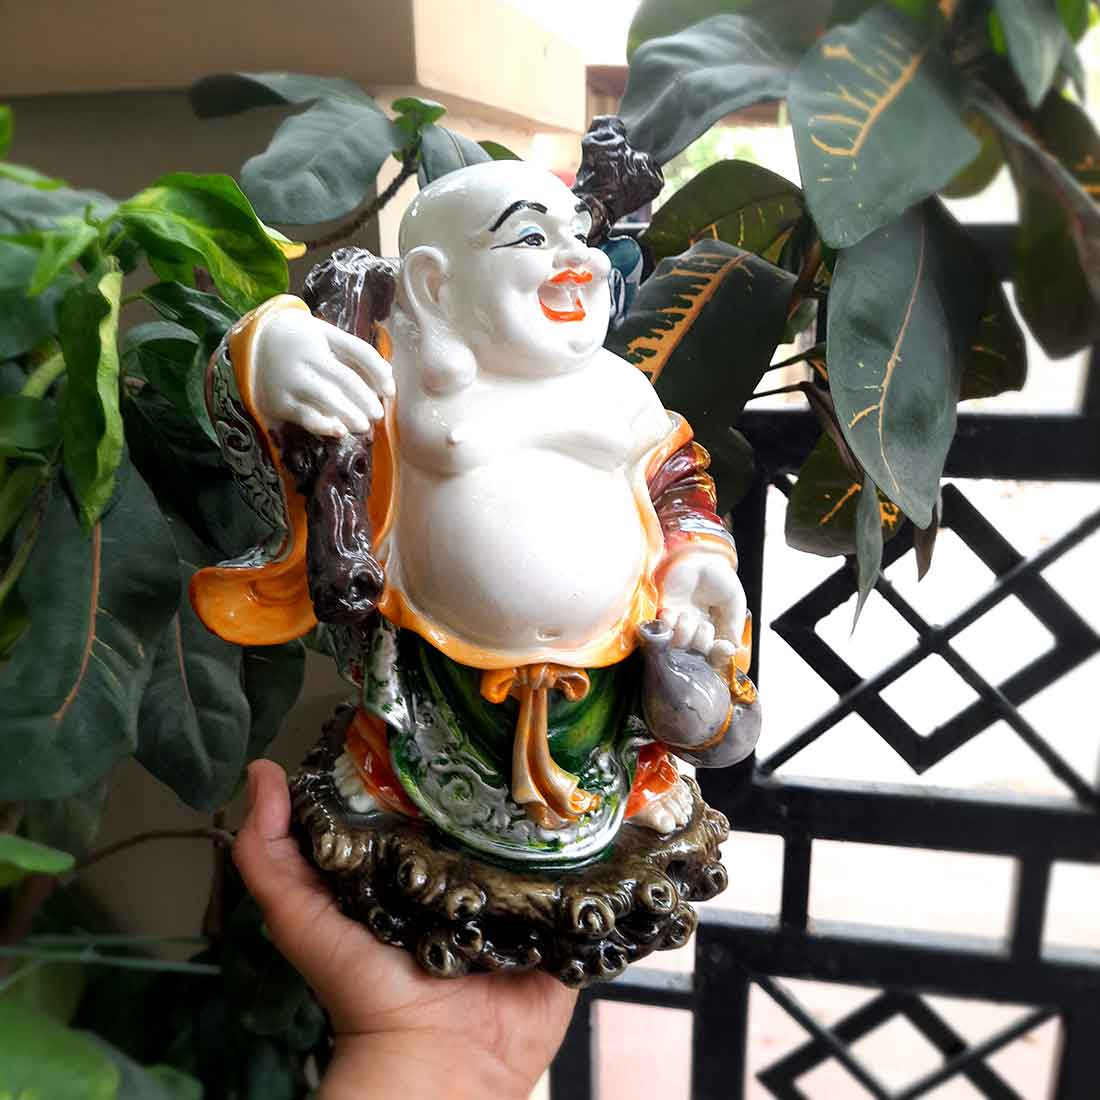 Laughing Buddha Statue - for for Money, Wealth, Good Luck, & Gift - 11 Inch - ApkaMart